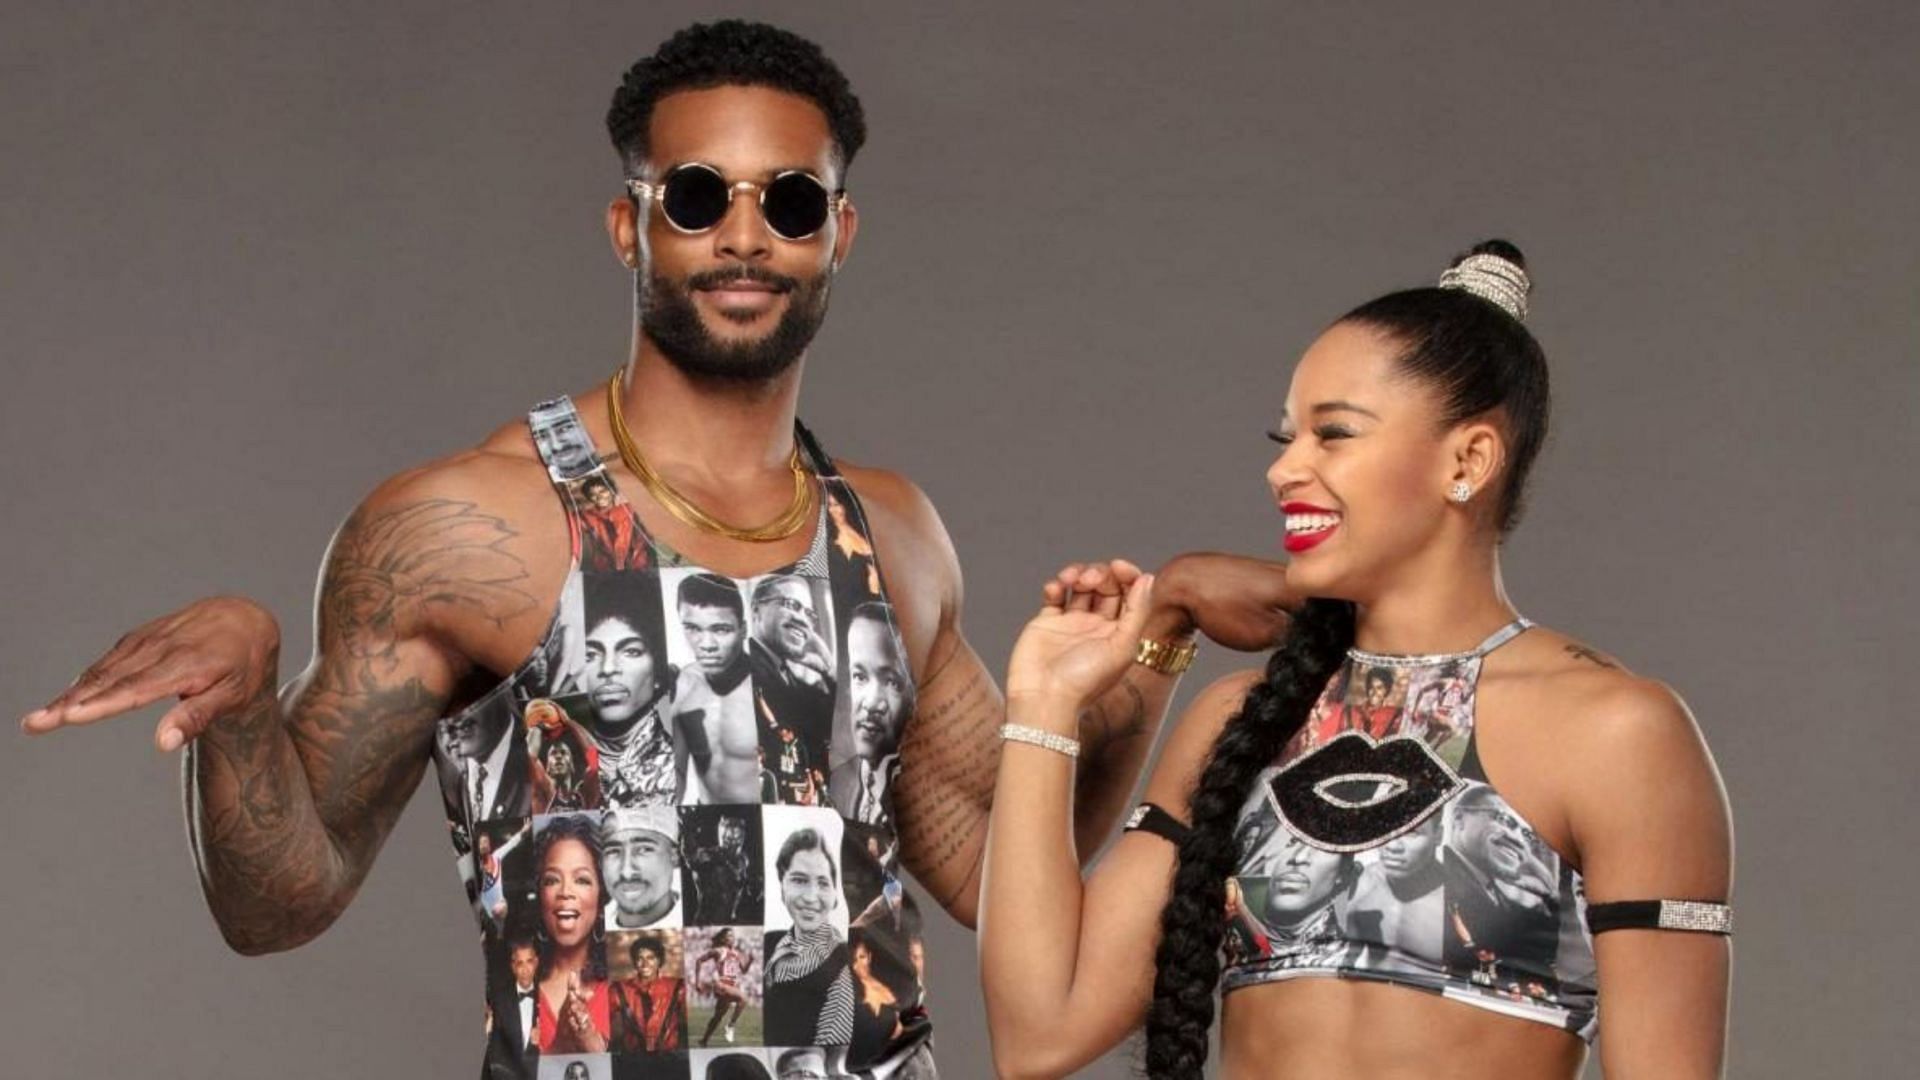 Montez Ford and Bianca Belair first met in NXT